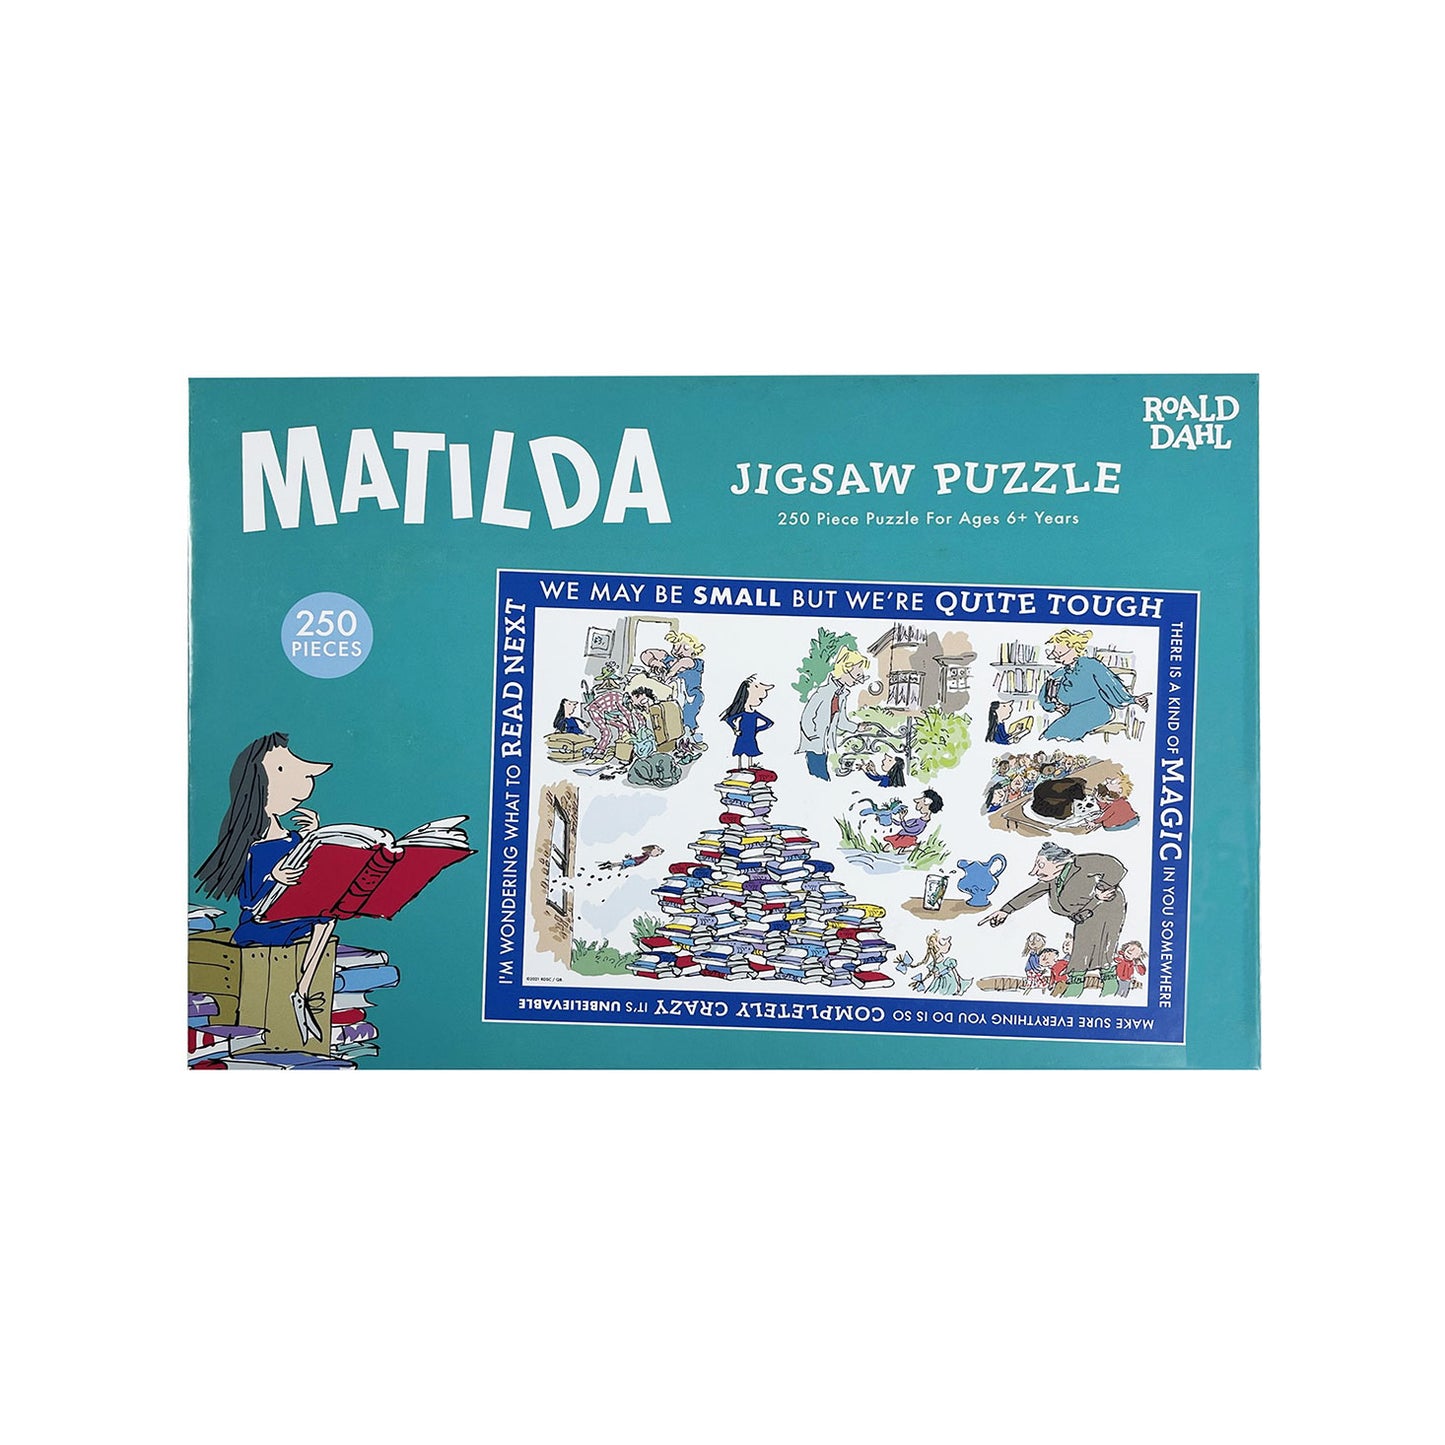 Matilda Jigsaw Puzzle based on Roald Dahl with illustrations by Quentin Blake